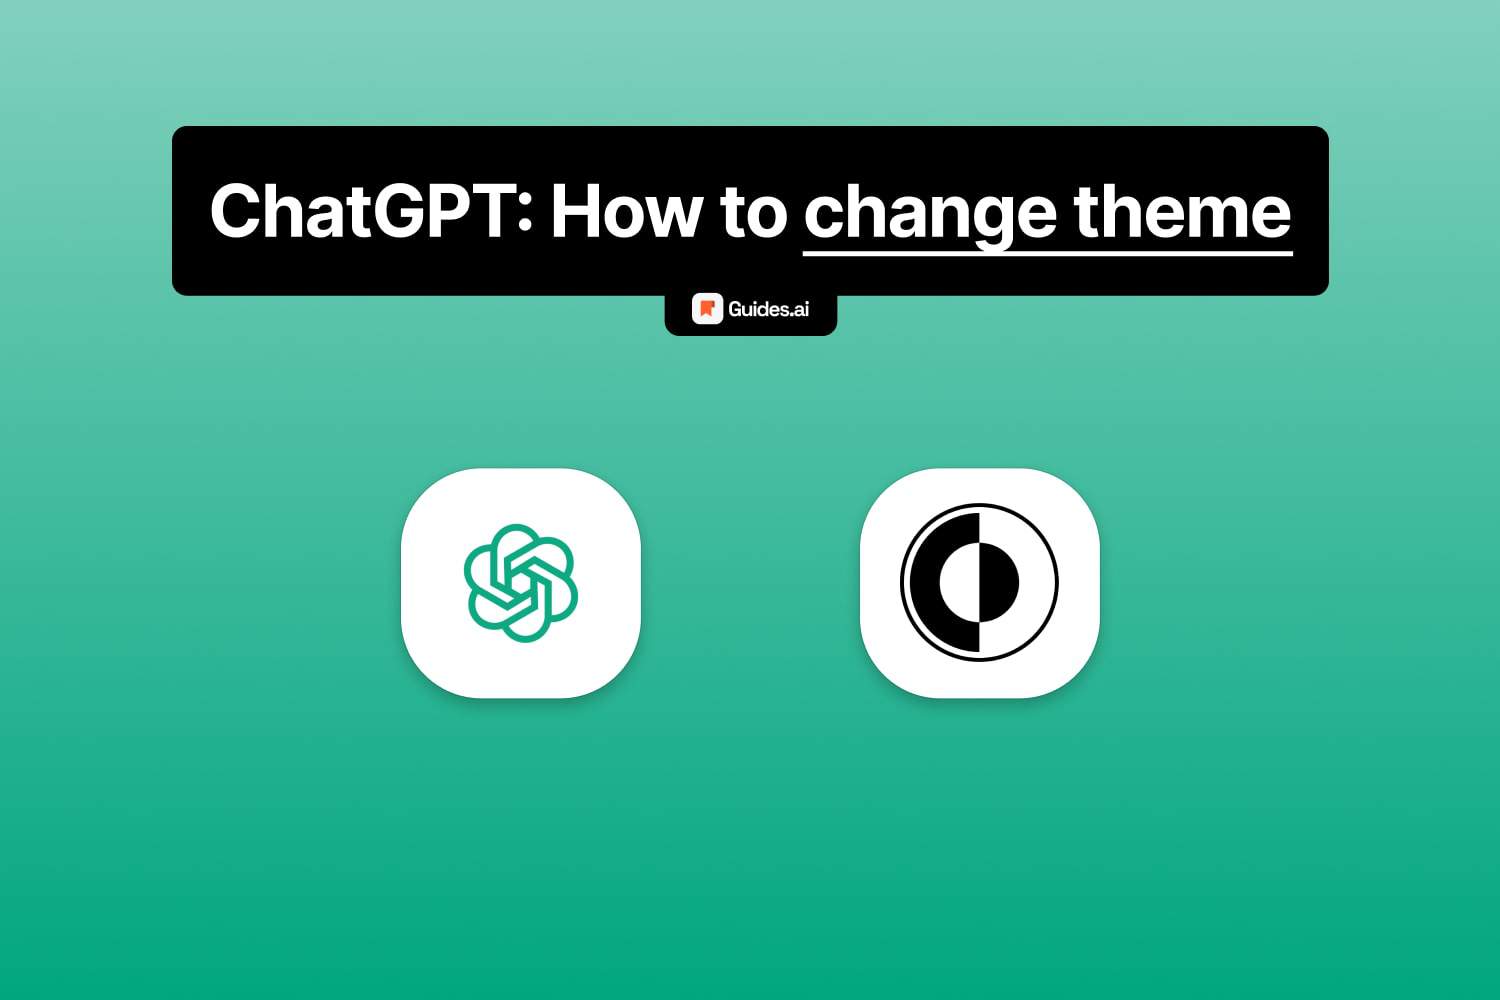 How to change the theme in ChatGPT